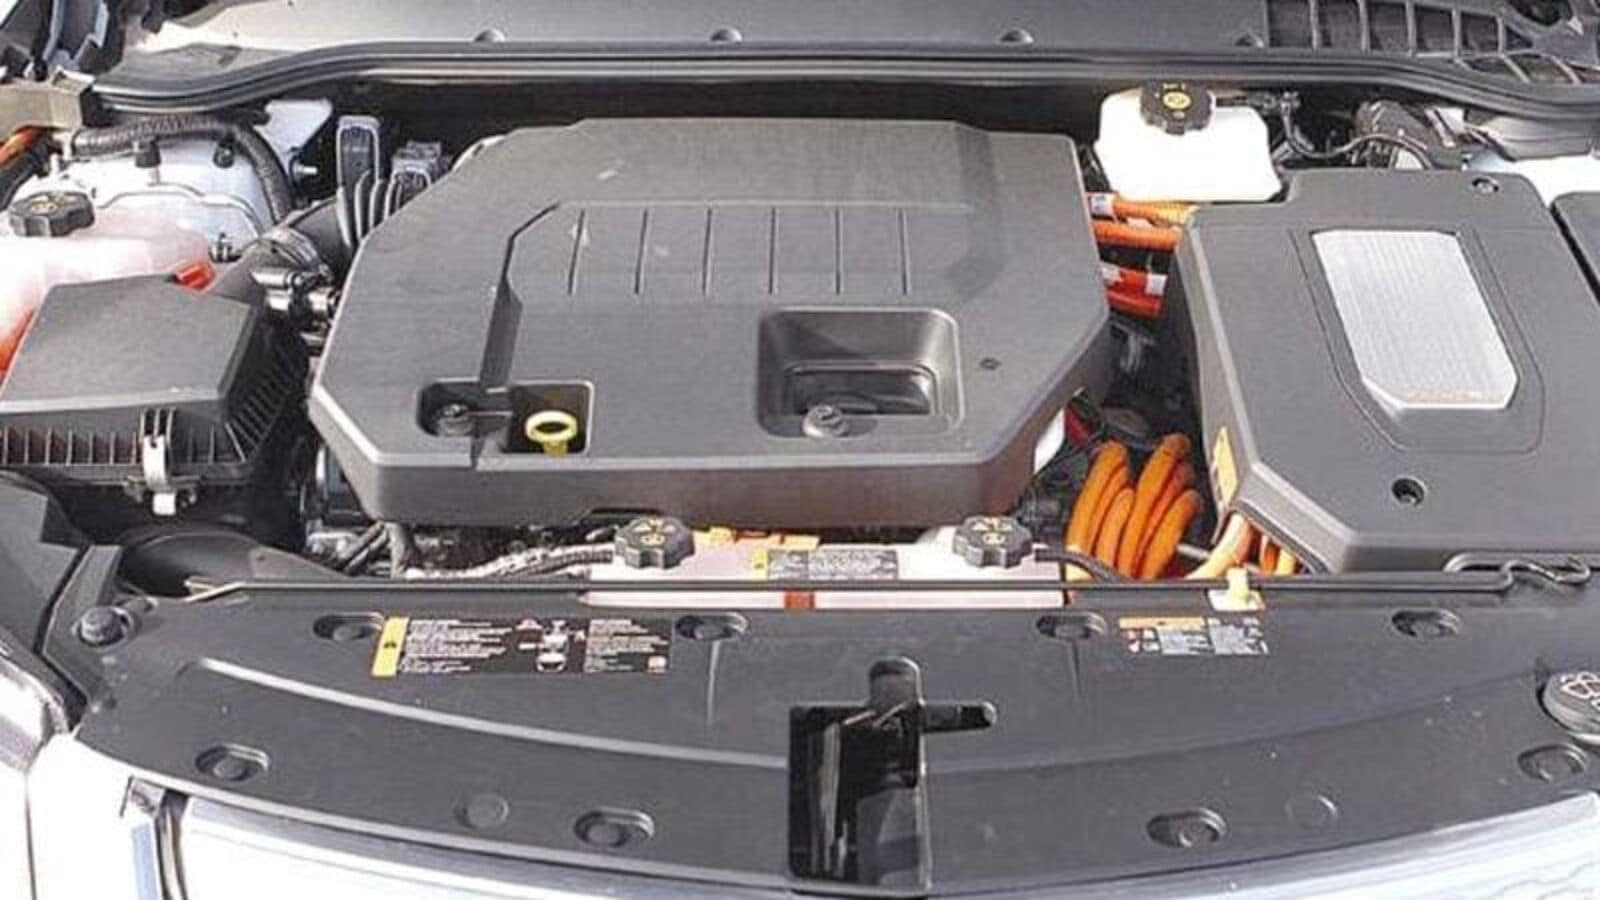 How to jump-start a car. Follow these steps to keep on motoring